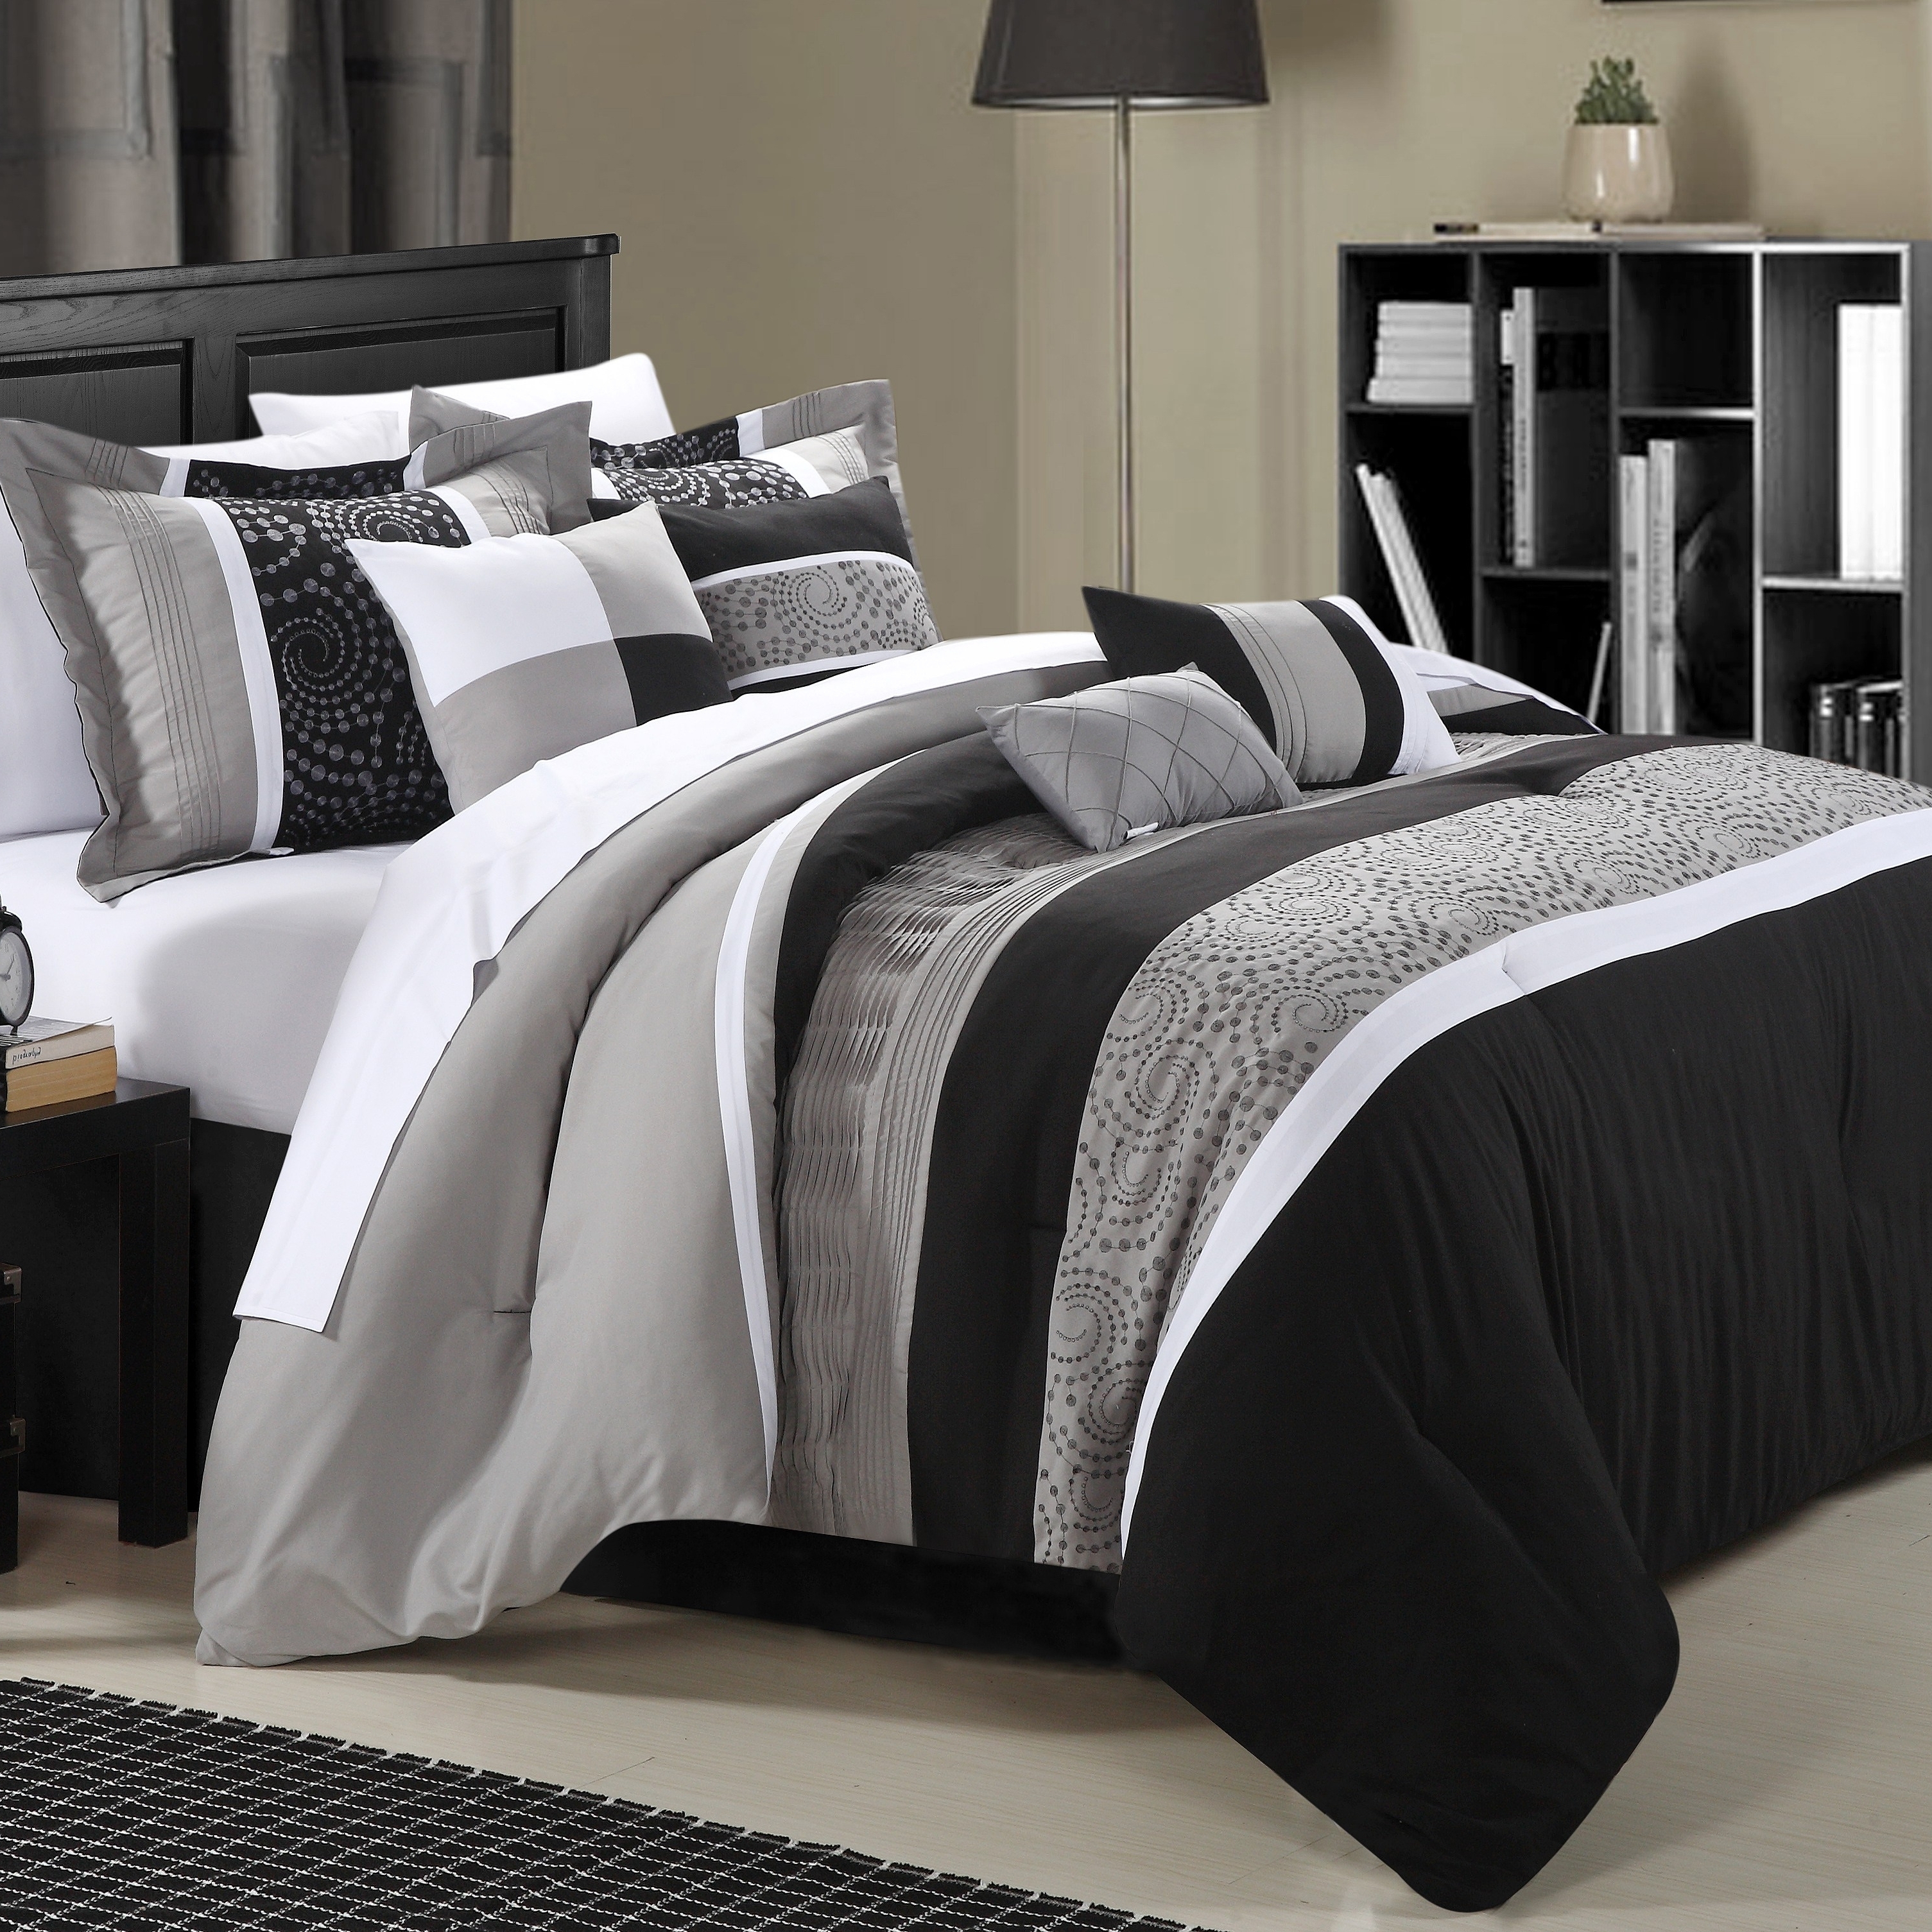 Euphoria 8-Piece Embroidered Comforter Set Embroidery Pintuck Bedding With Bed Skirt And Decorative Pillows Shams - Black, Queen